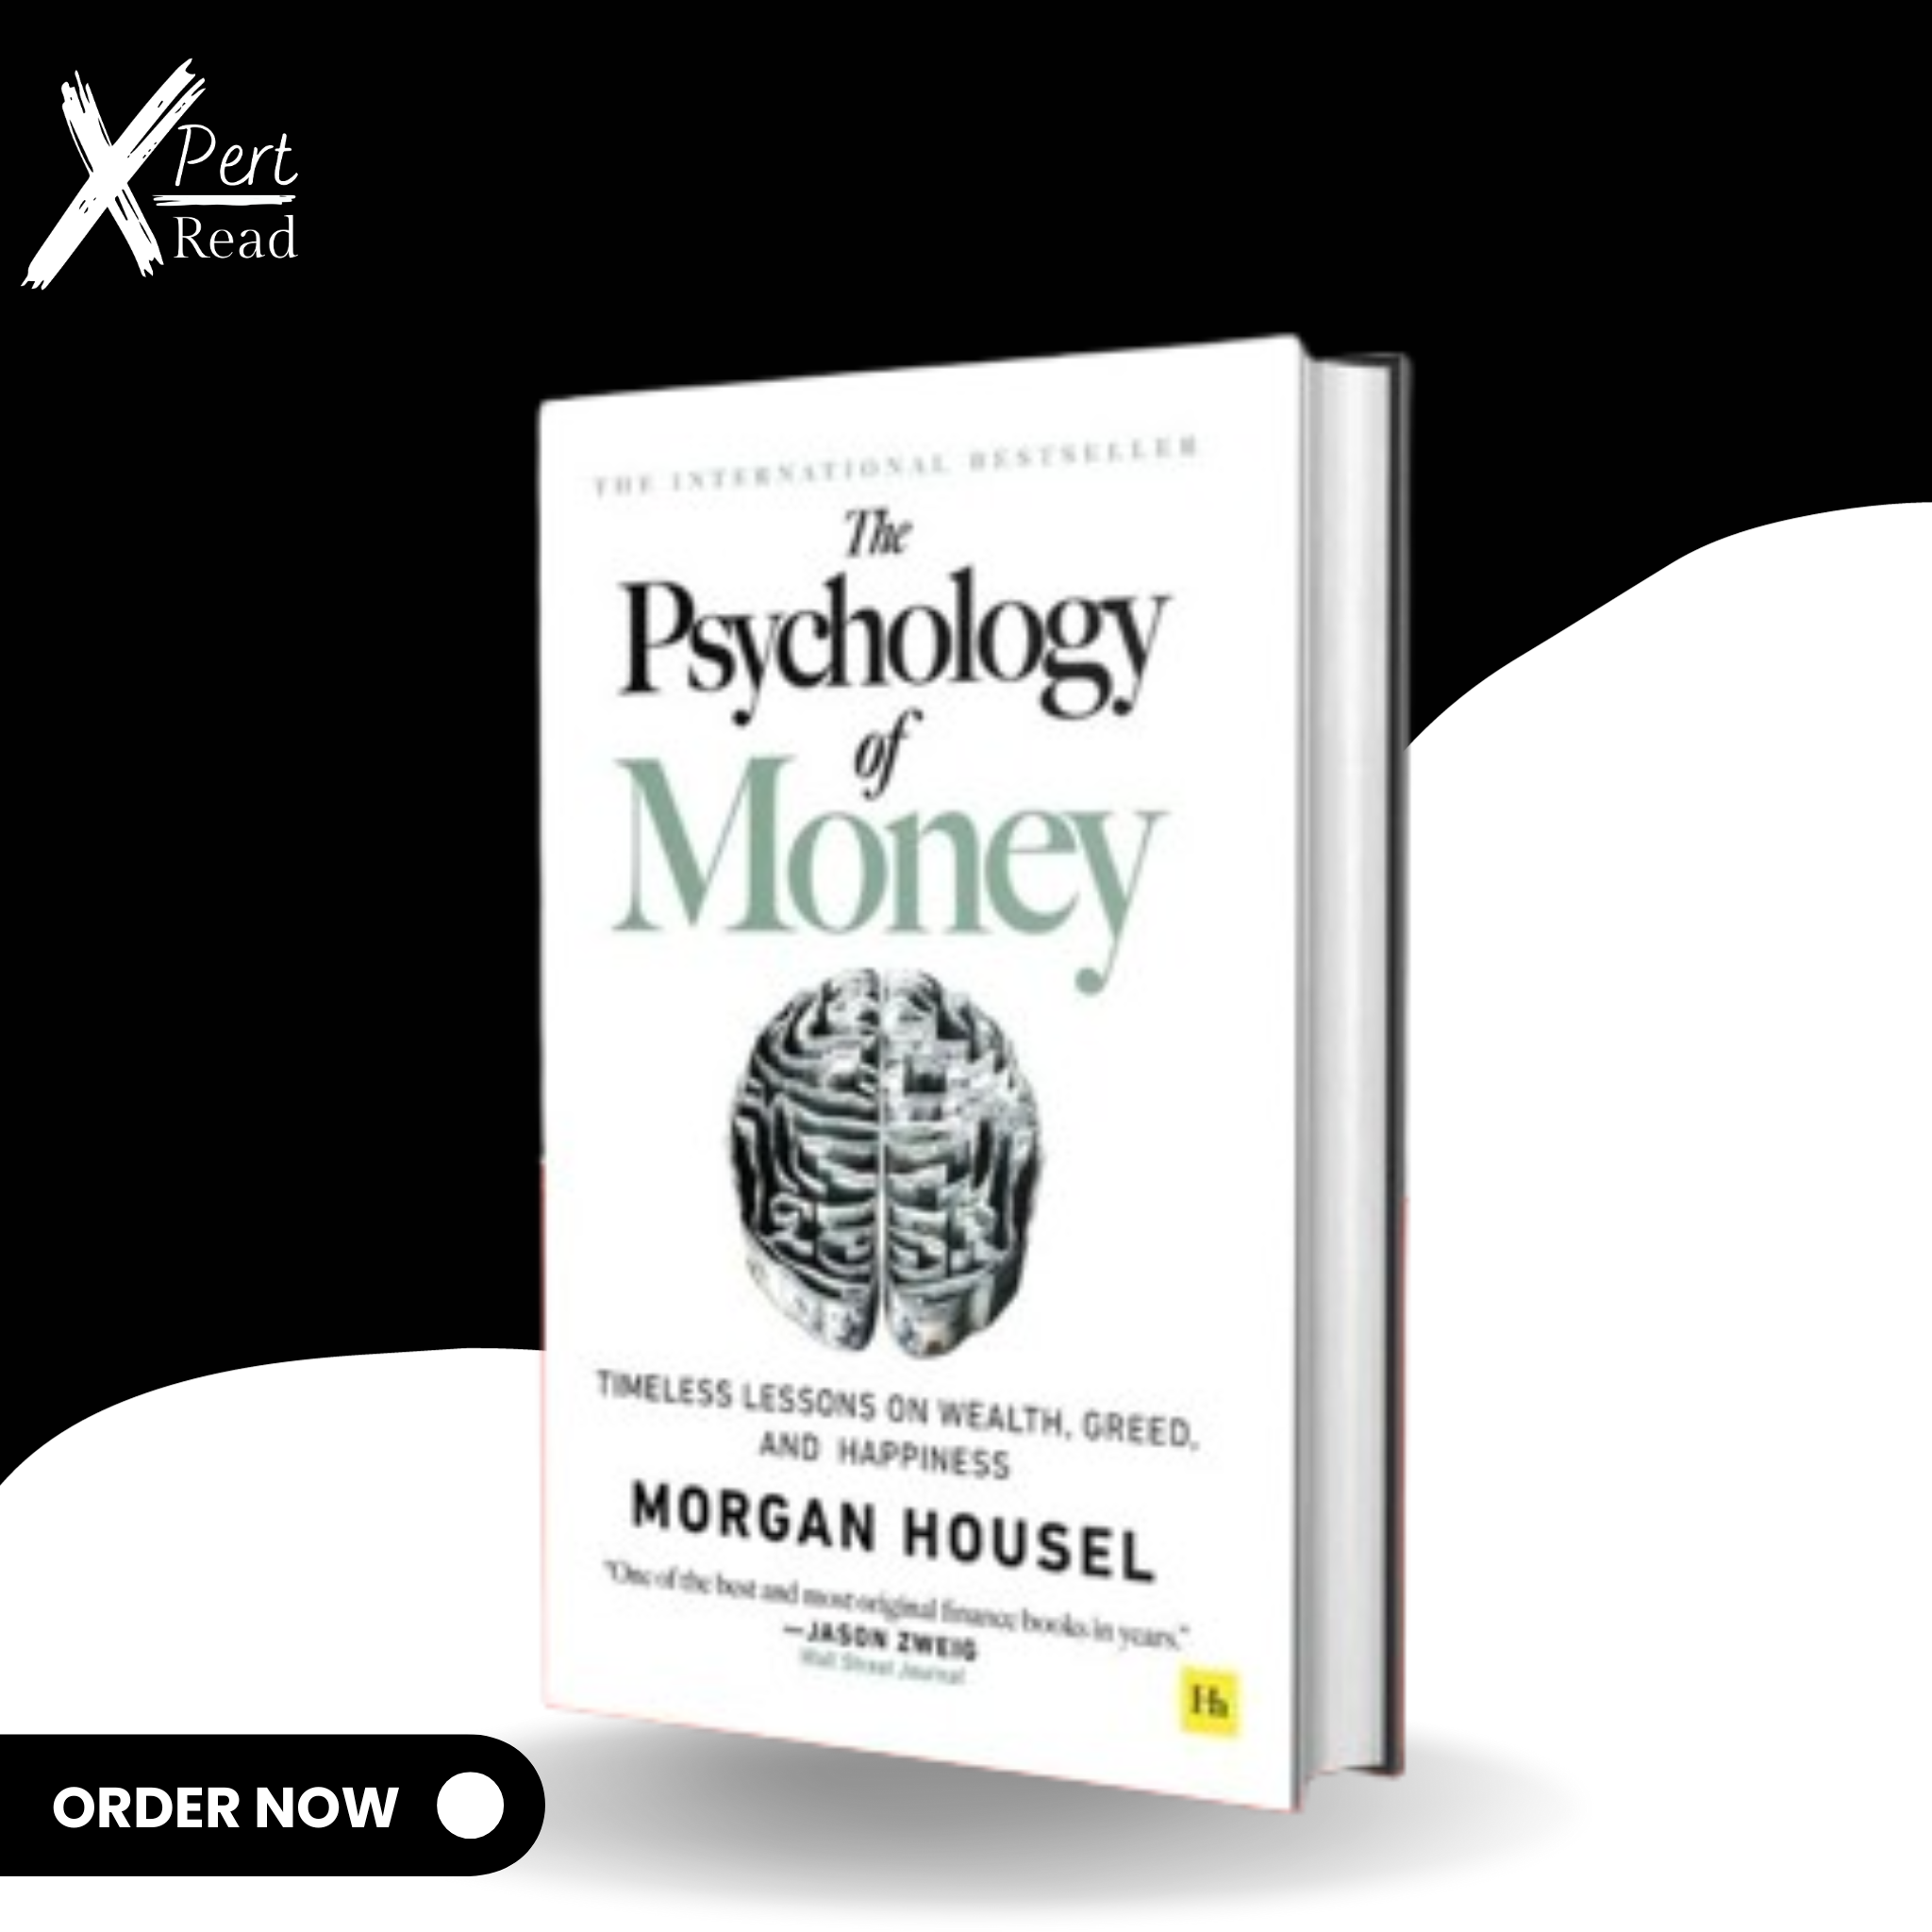 The Psychology of Money by Morgan Housel (Original Hardcover)